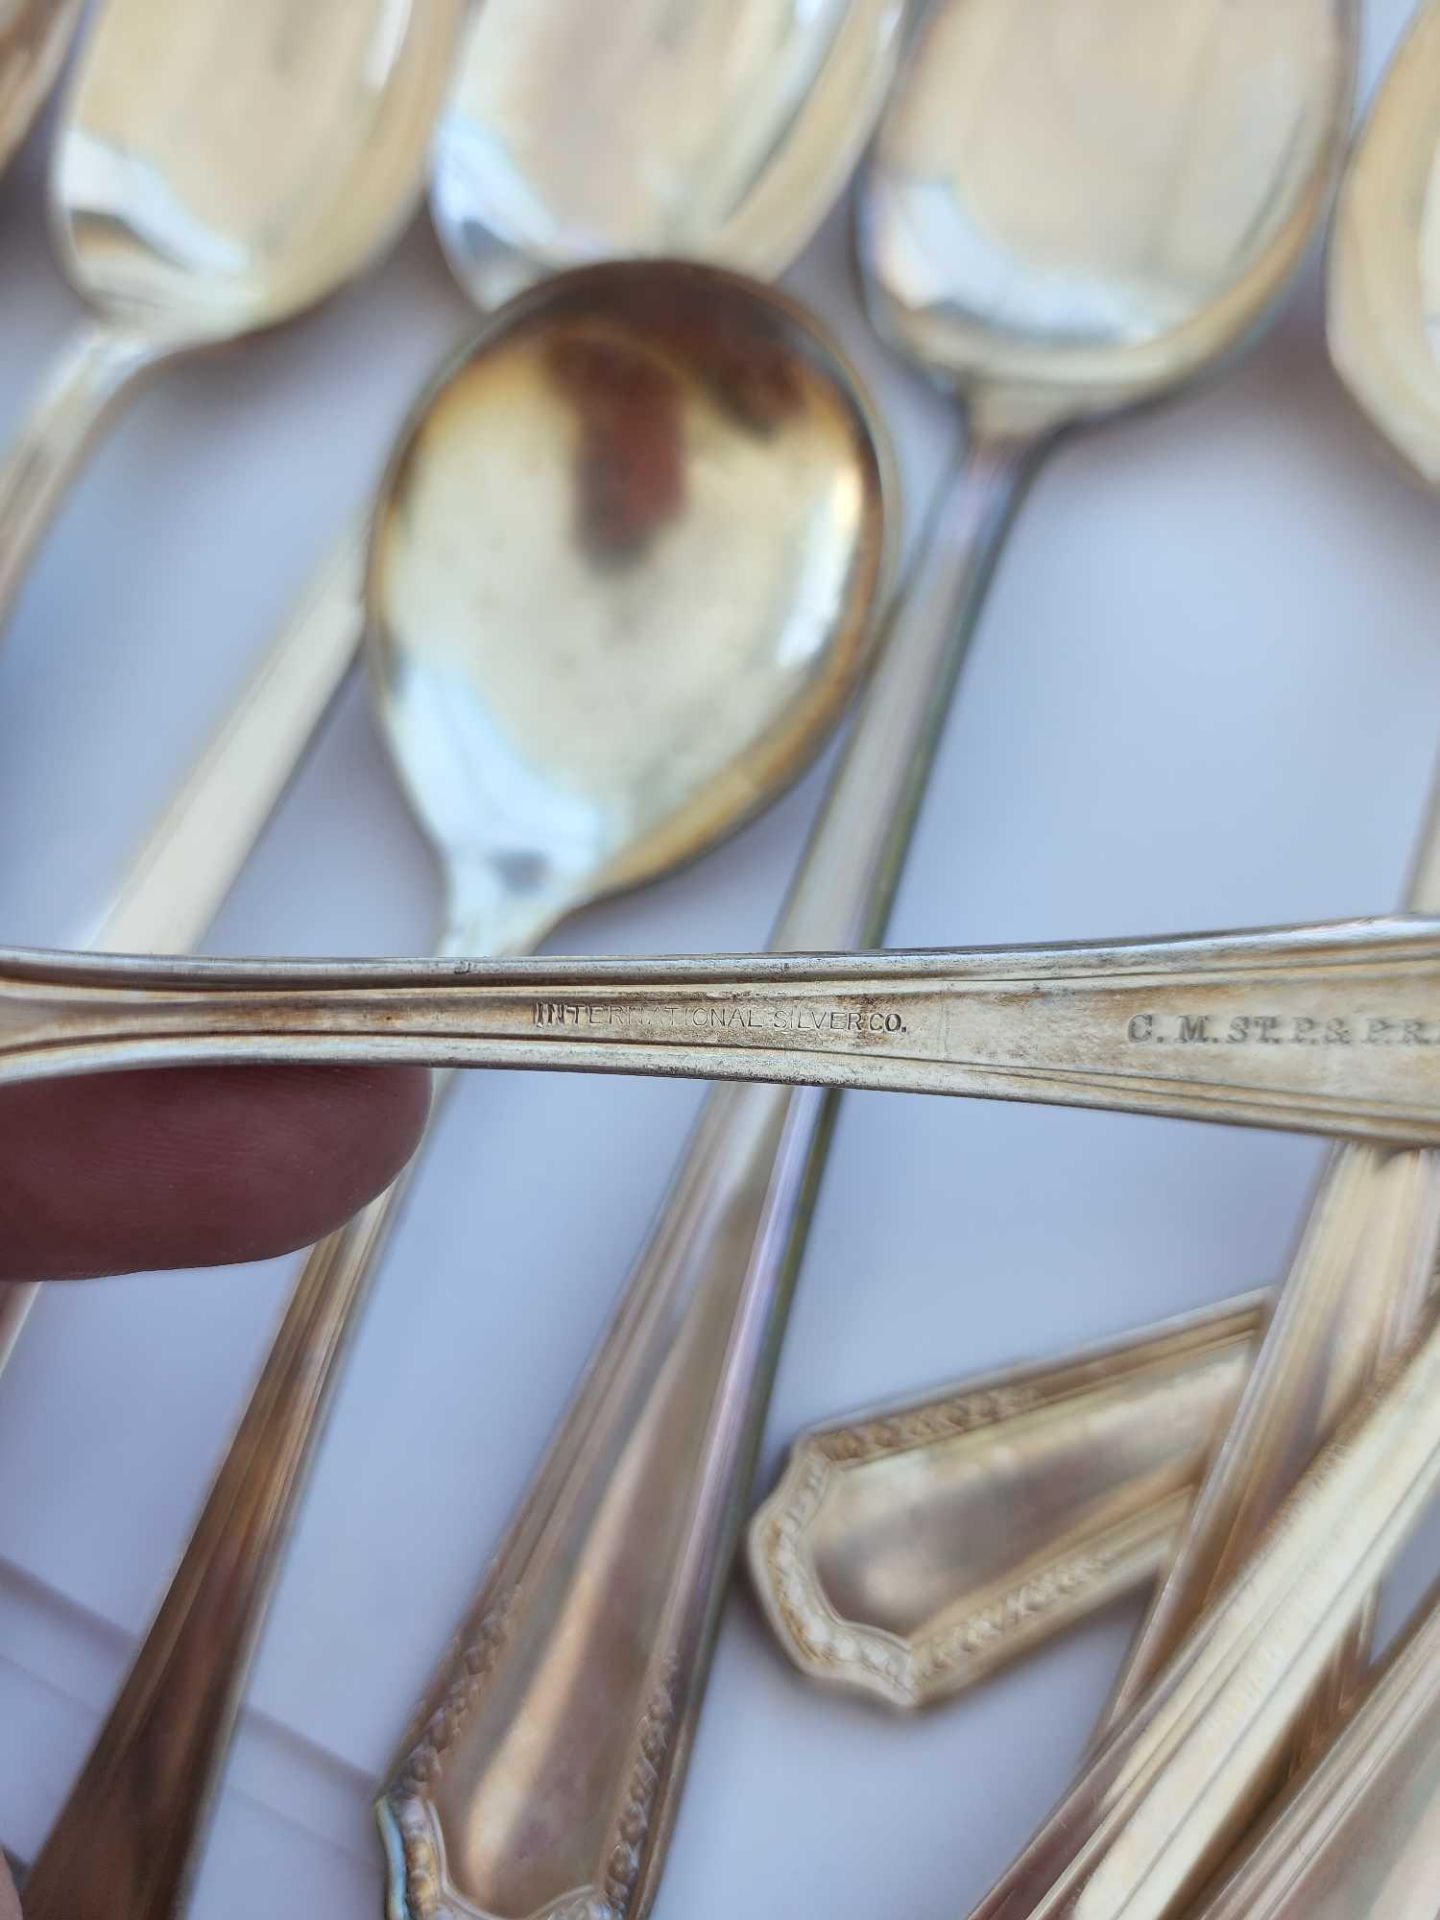 Antique Silver Plated Spoons - Image 8 of 8